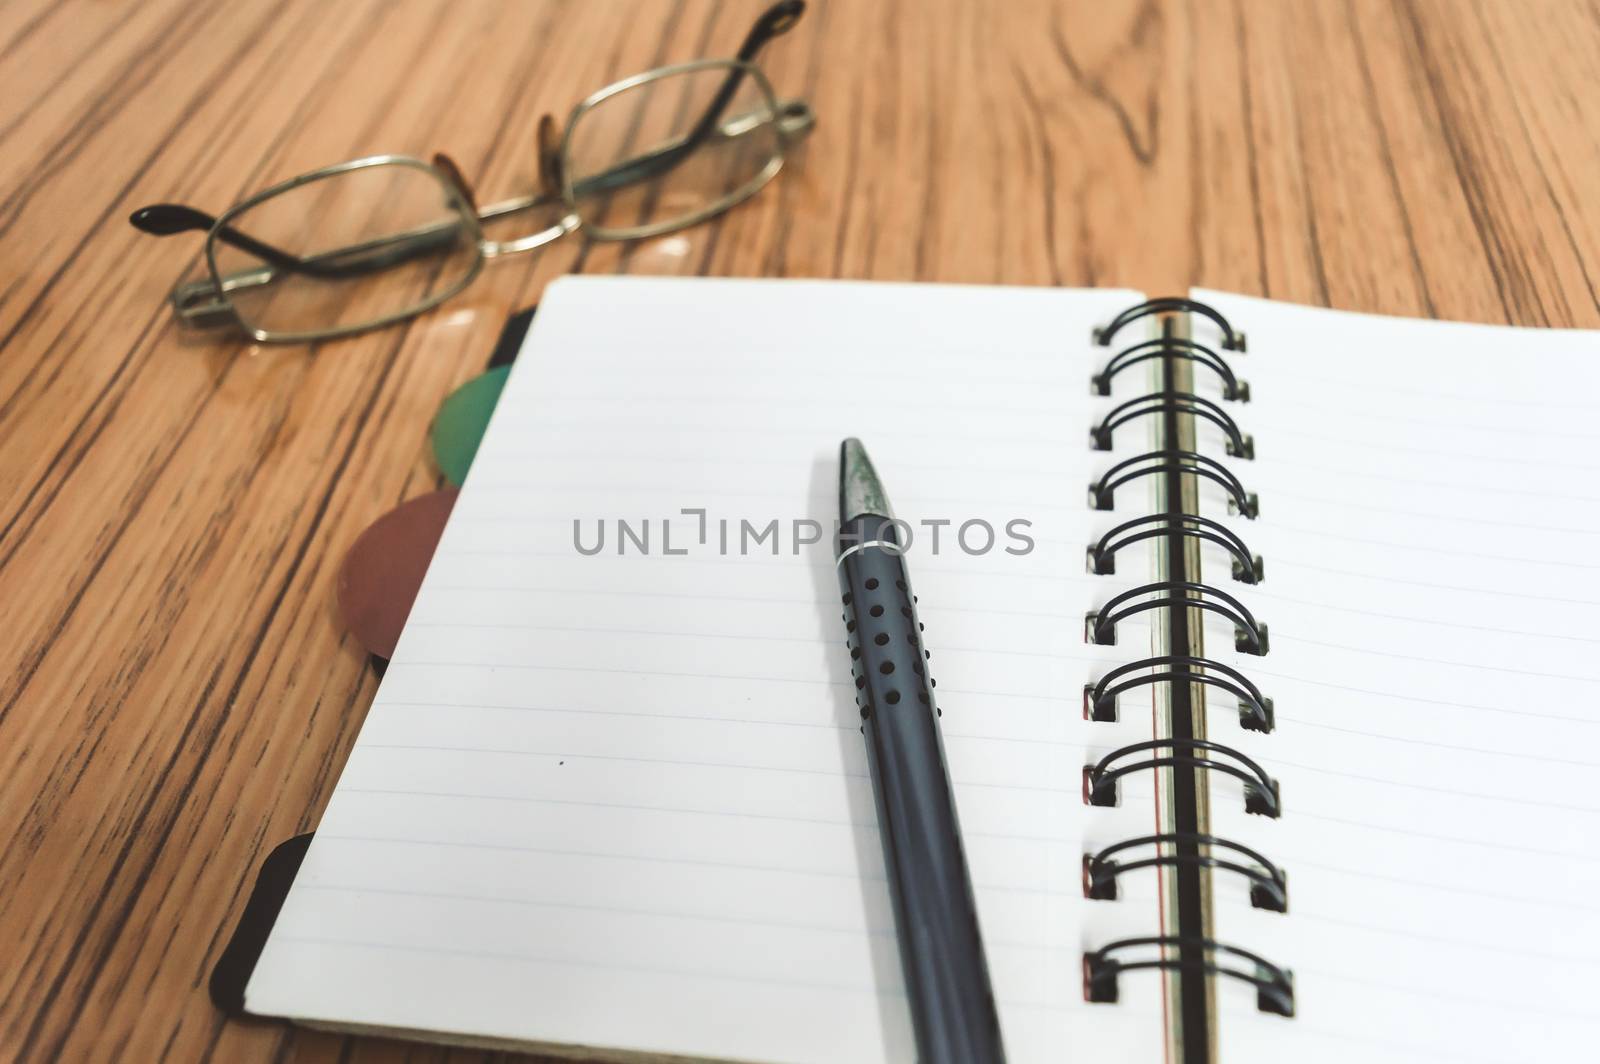 Desk with open notebook with blank pages, eye glasses and a pen. Business still life concept with office stuff on table. Education, working and planning concept. Selective focus with shallow DOF.